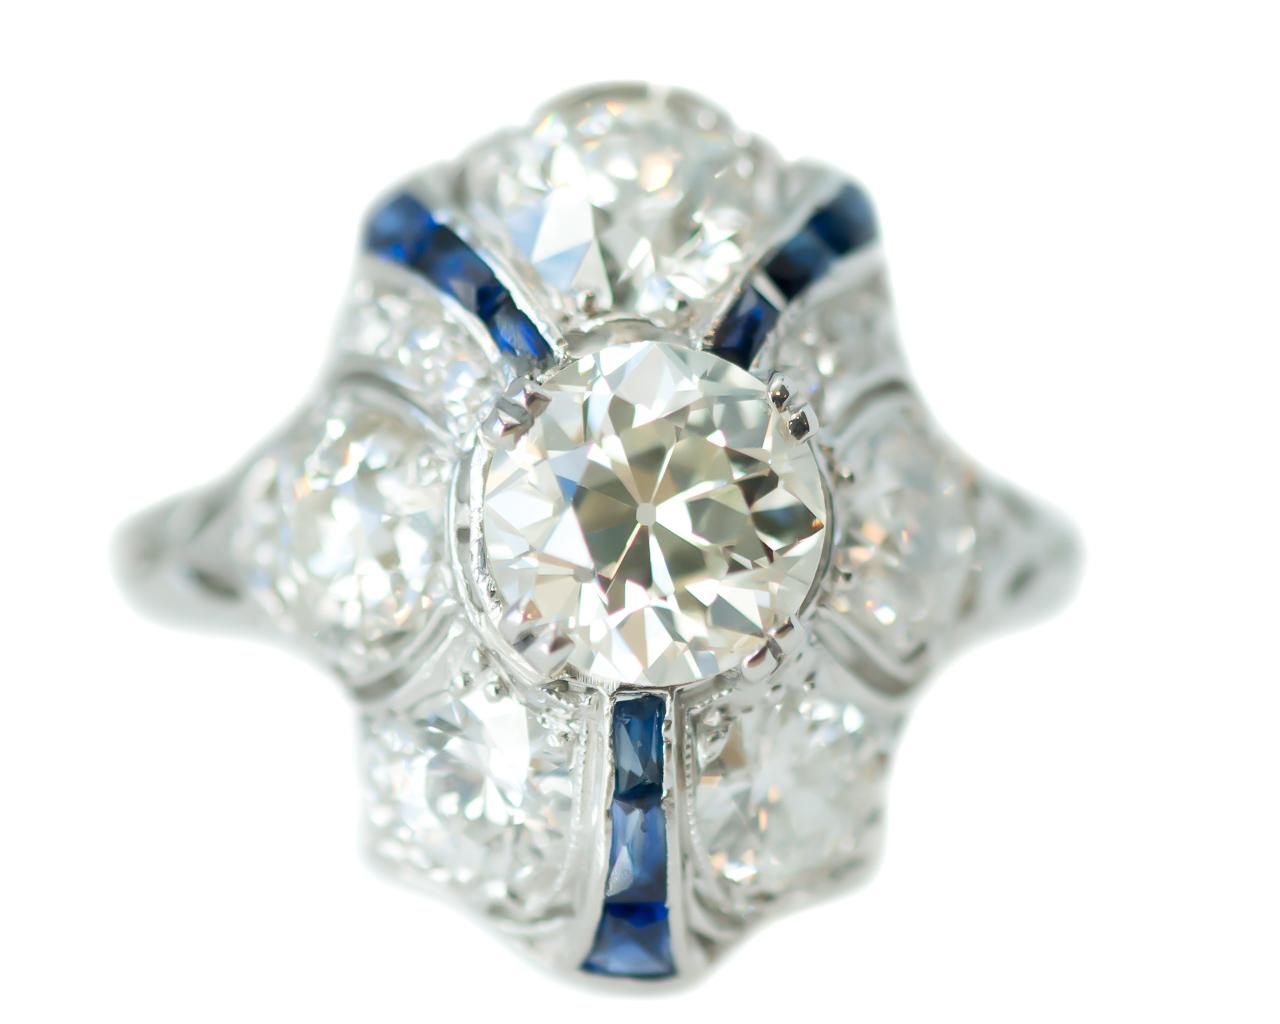 1915 Art Deco GIA 3.3 Carat Total Diamond and Sapphire Platinum Shield Ring For Sale 4